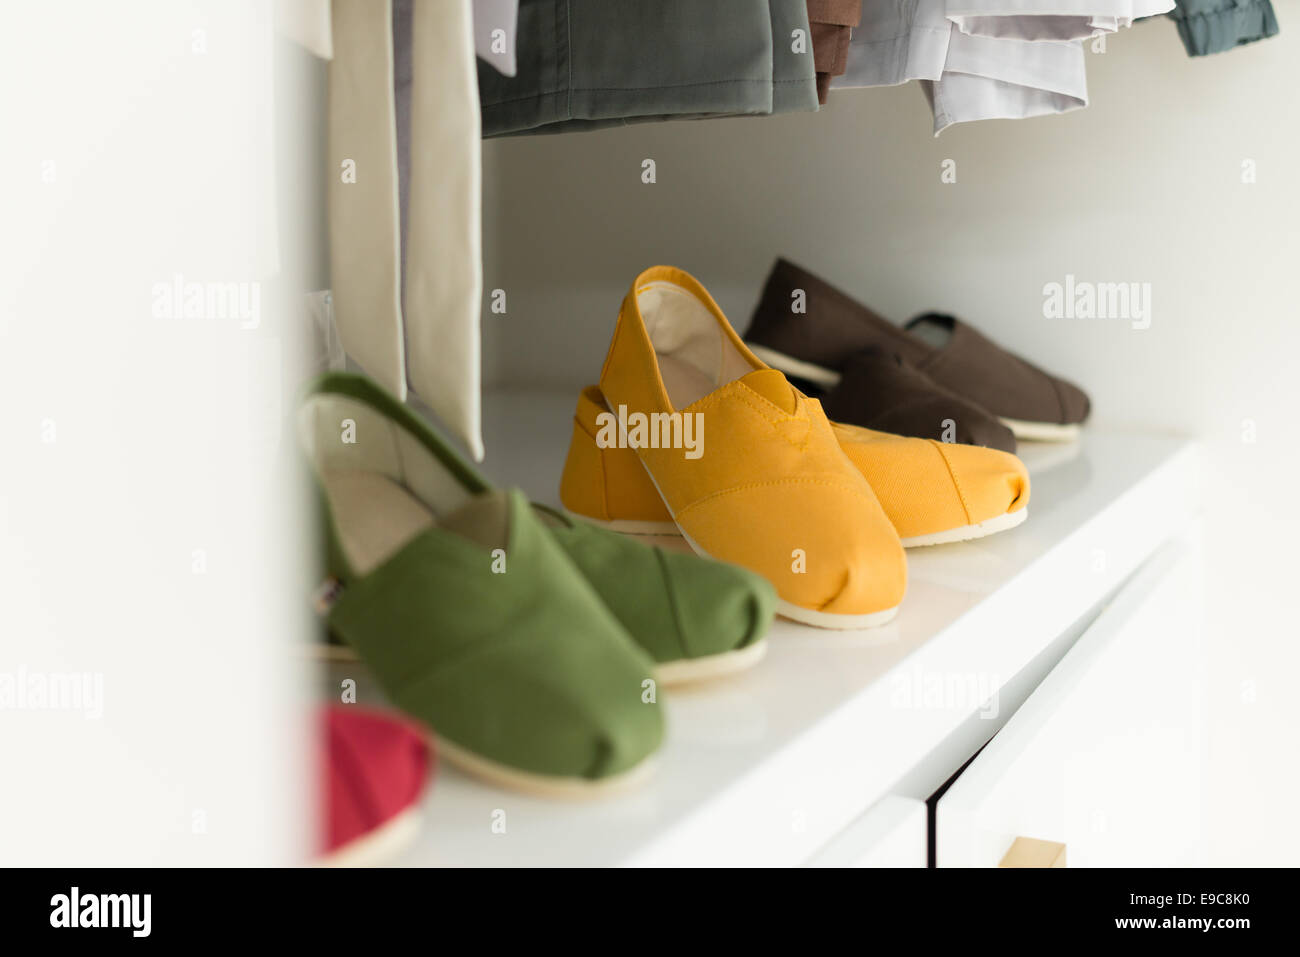 Row of new casual clothing on hangers at shop with four colorful pairs of shoes under it. Clothes presented as in wardrobe. Stock Photo